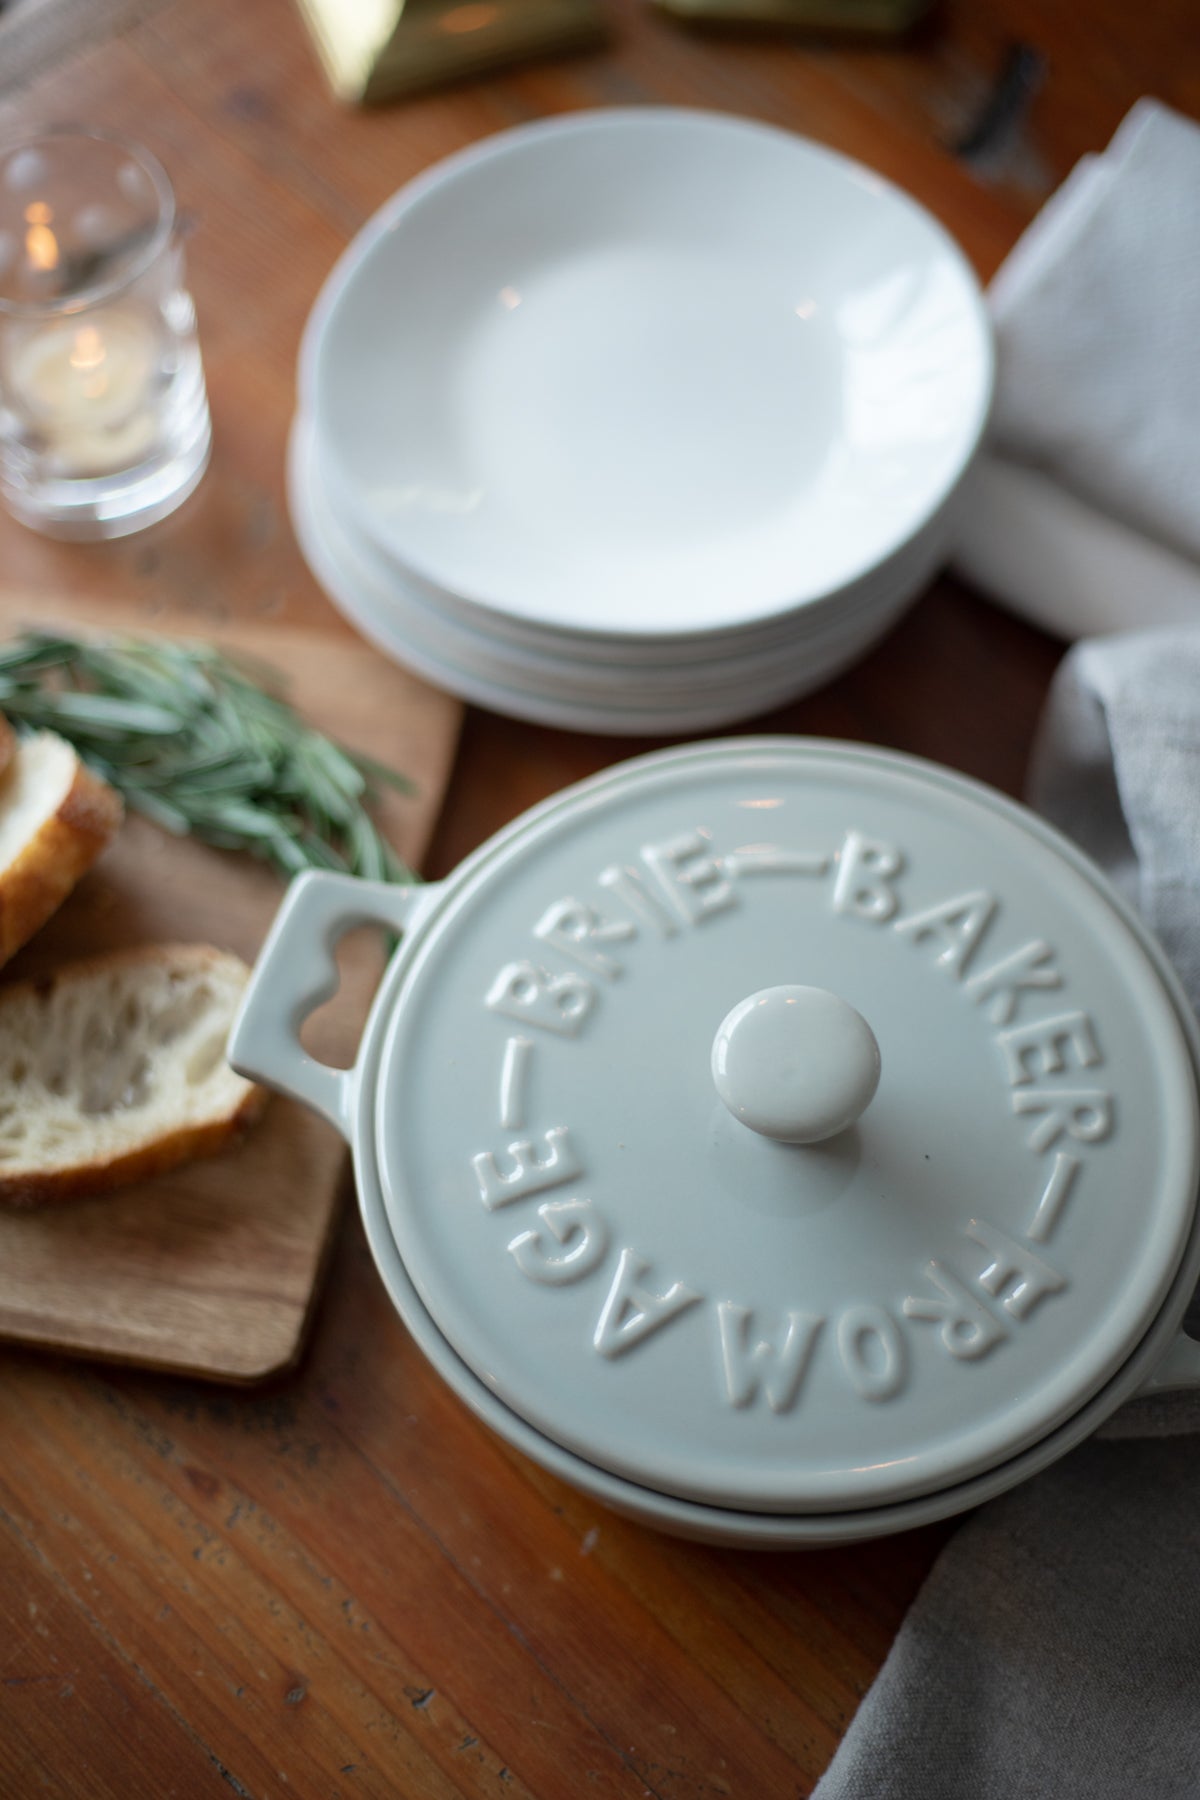  Muldale Brie Baker with Lid and Spreader - Camembert